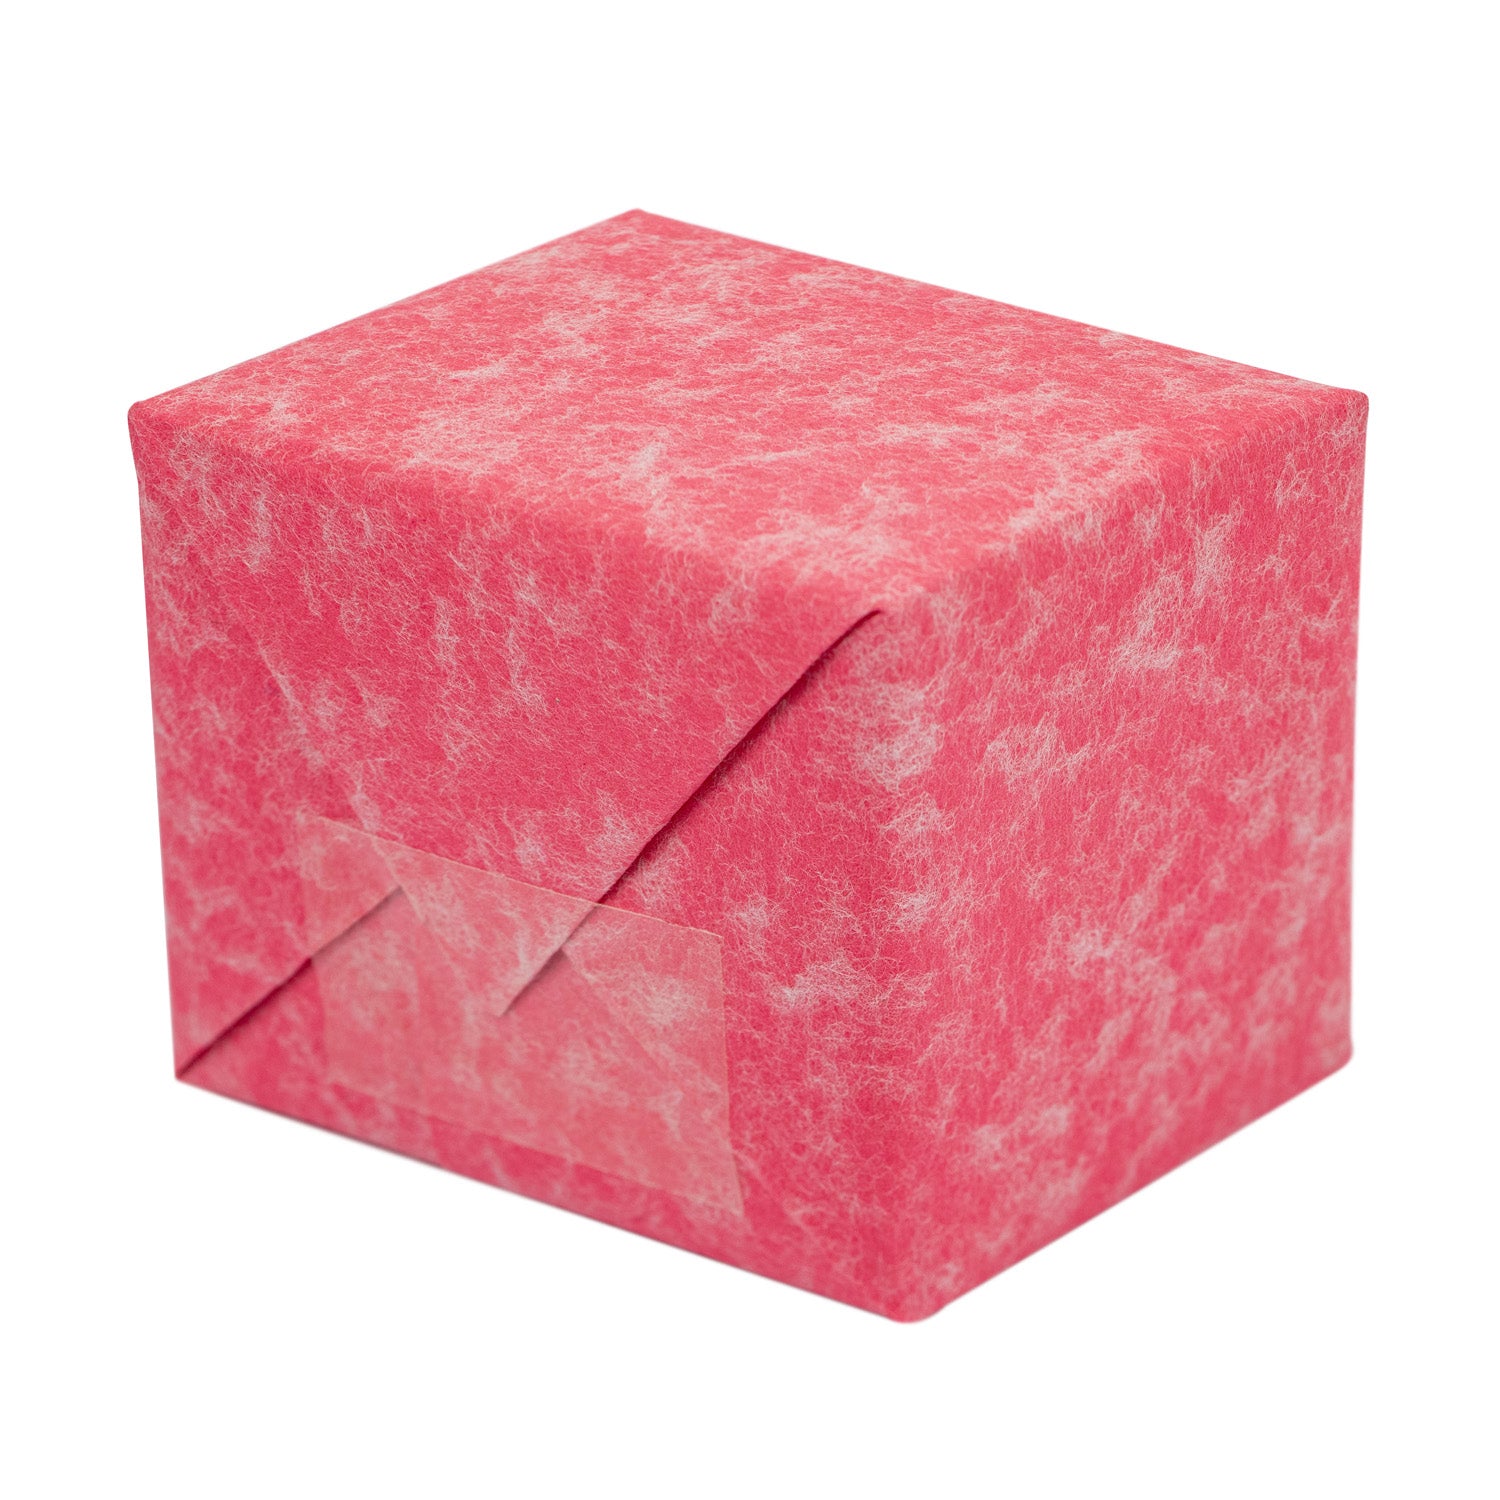 Red Sky Echizen Washi Japanese Wrapping Paper box